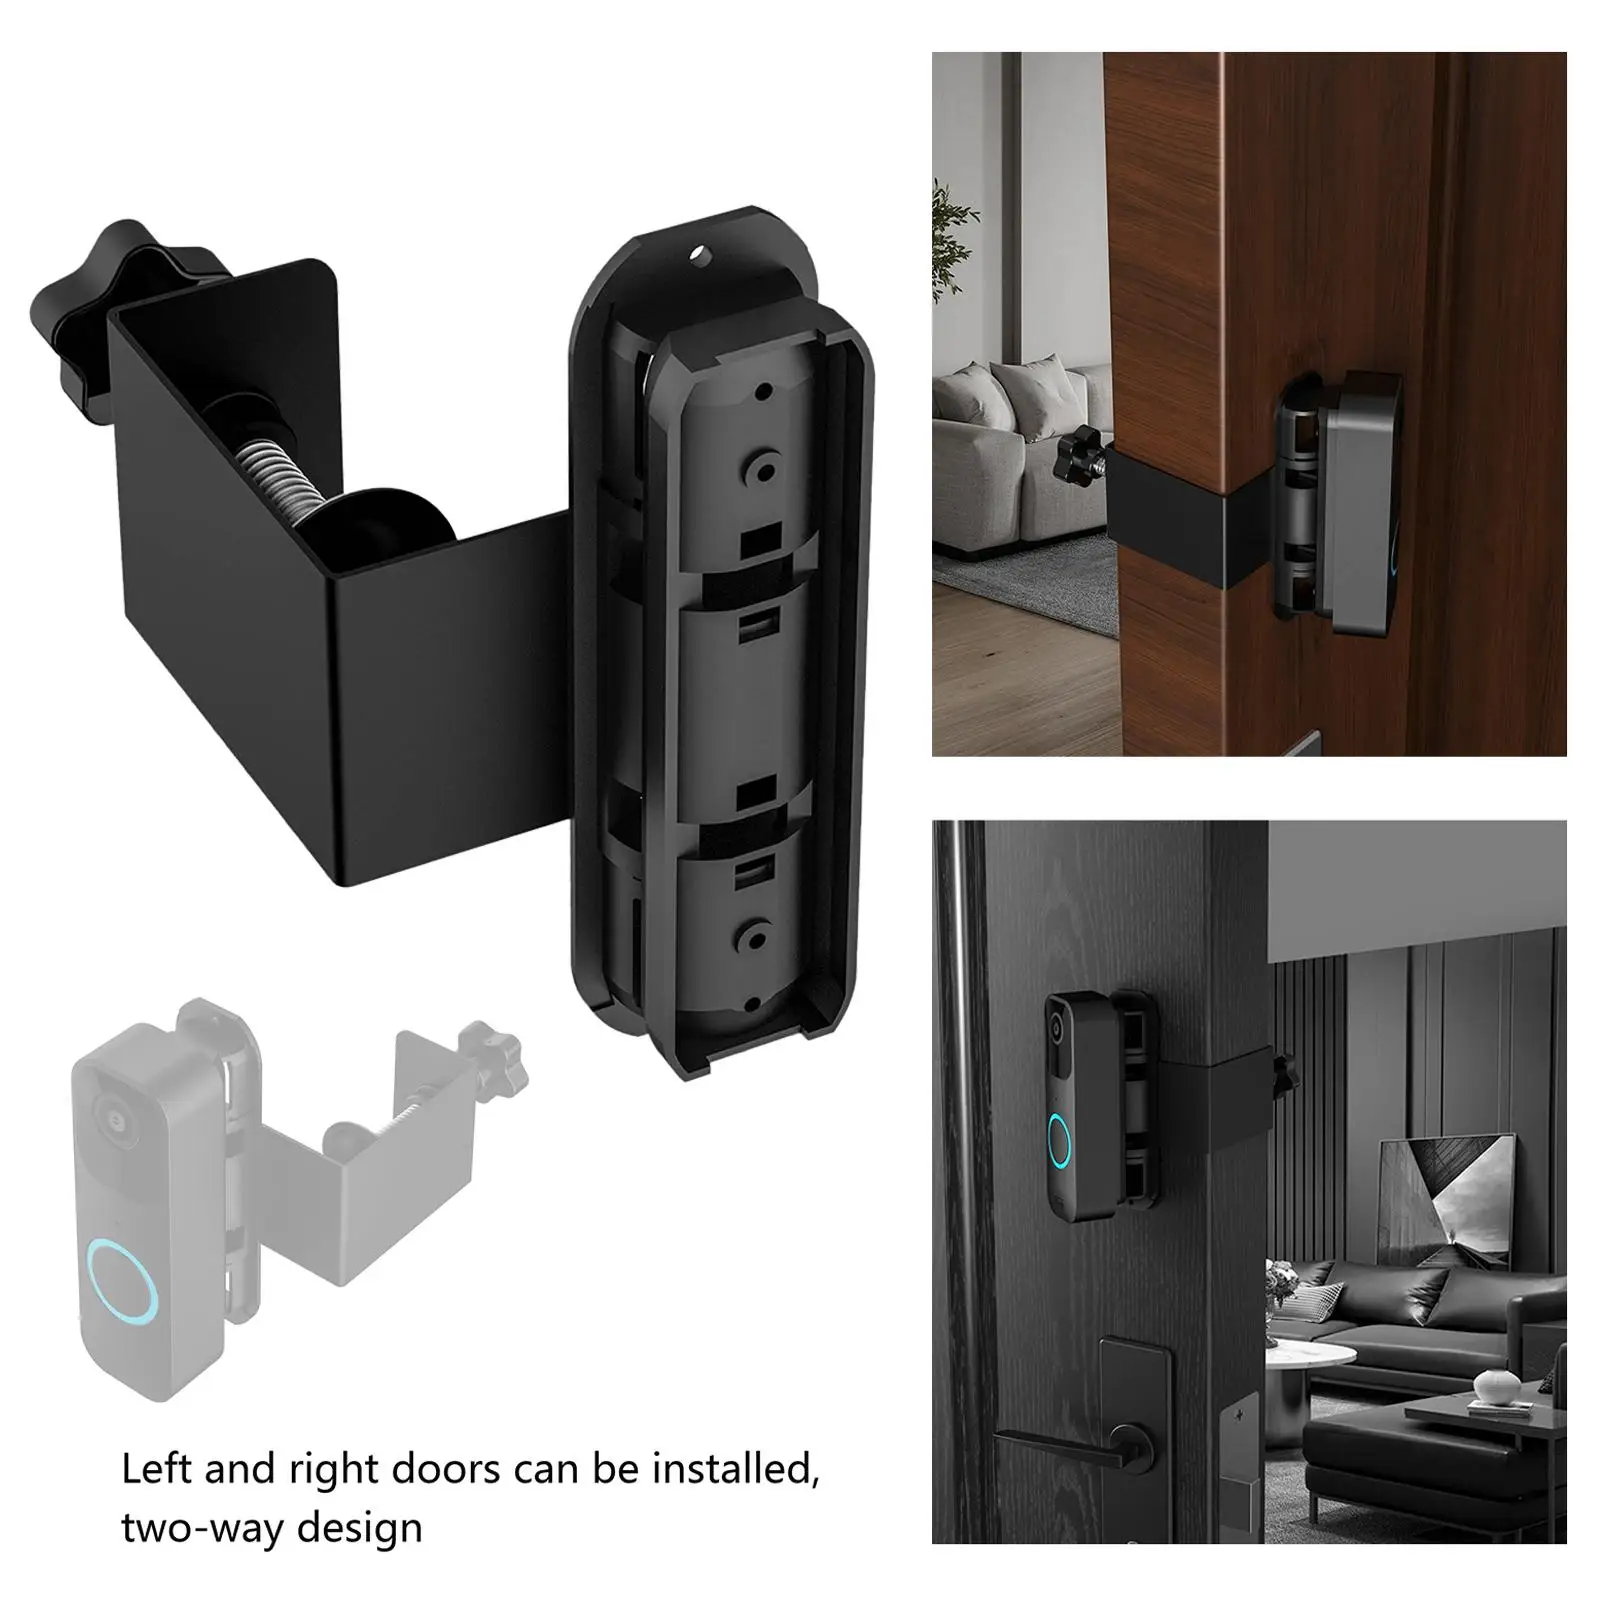 Doorbell Mount Adjustable Protect Cover Accs Bracket No-Drill for House Office Home